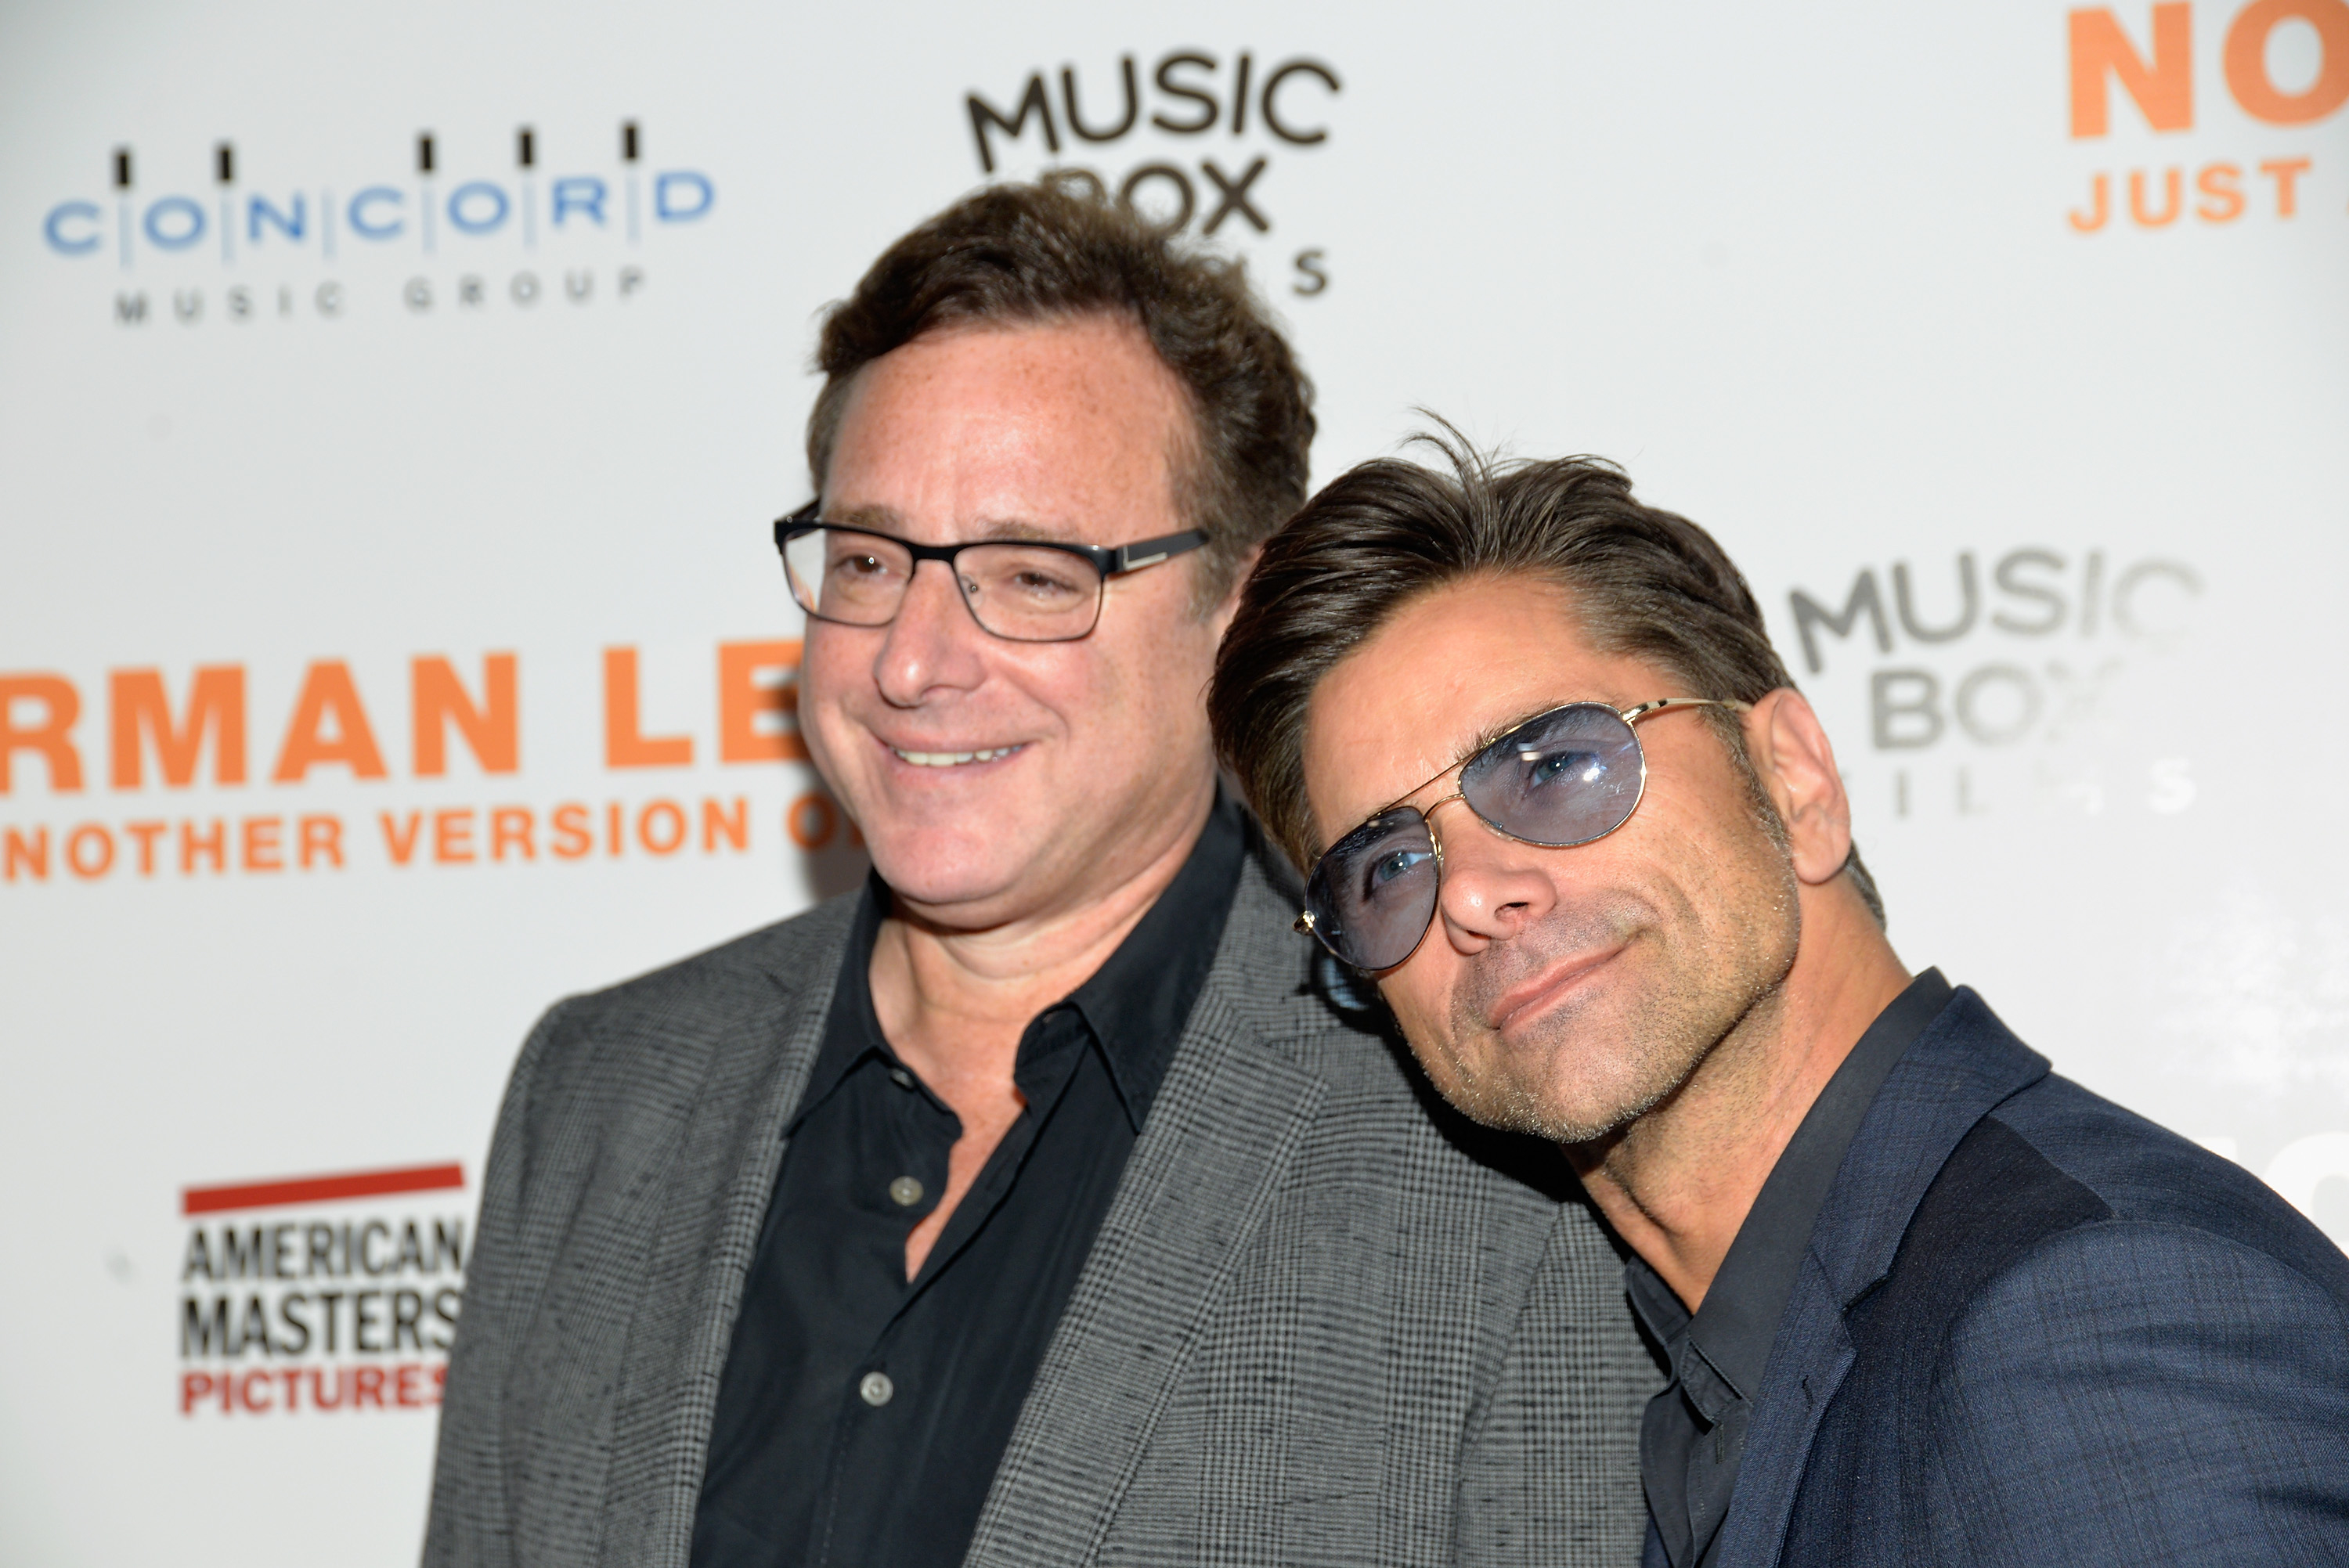 Bob Saget and John Stamos at a Music Box Films event, smiling for the camera. Saget wears a suit jacket over a shirt, while Stamos wears a blazer with sunglasses